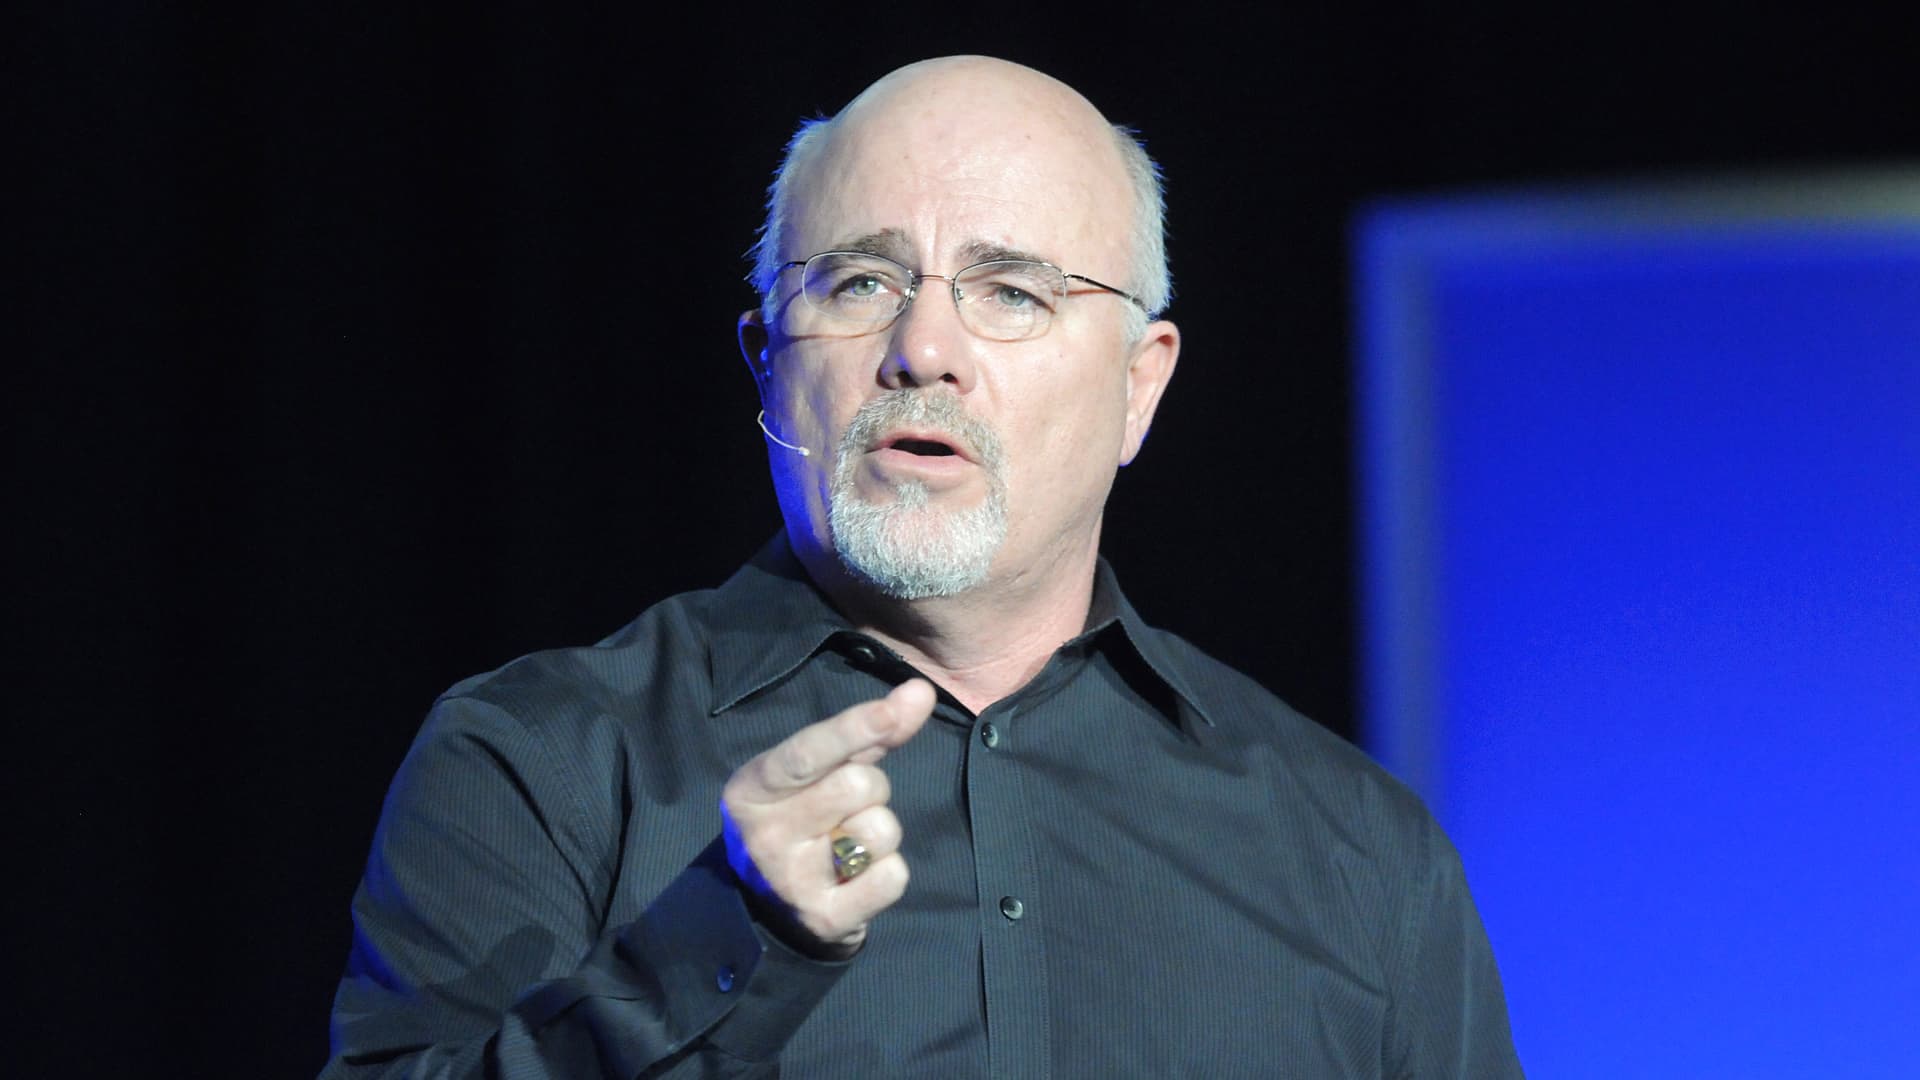 Money expert Dave Ramsey tells students: Skip the 'dream' college and go to school where you can afford